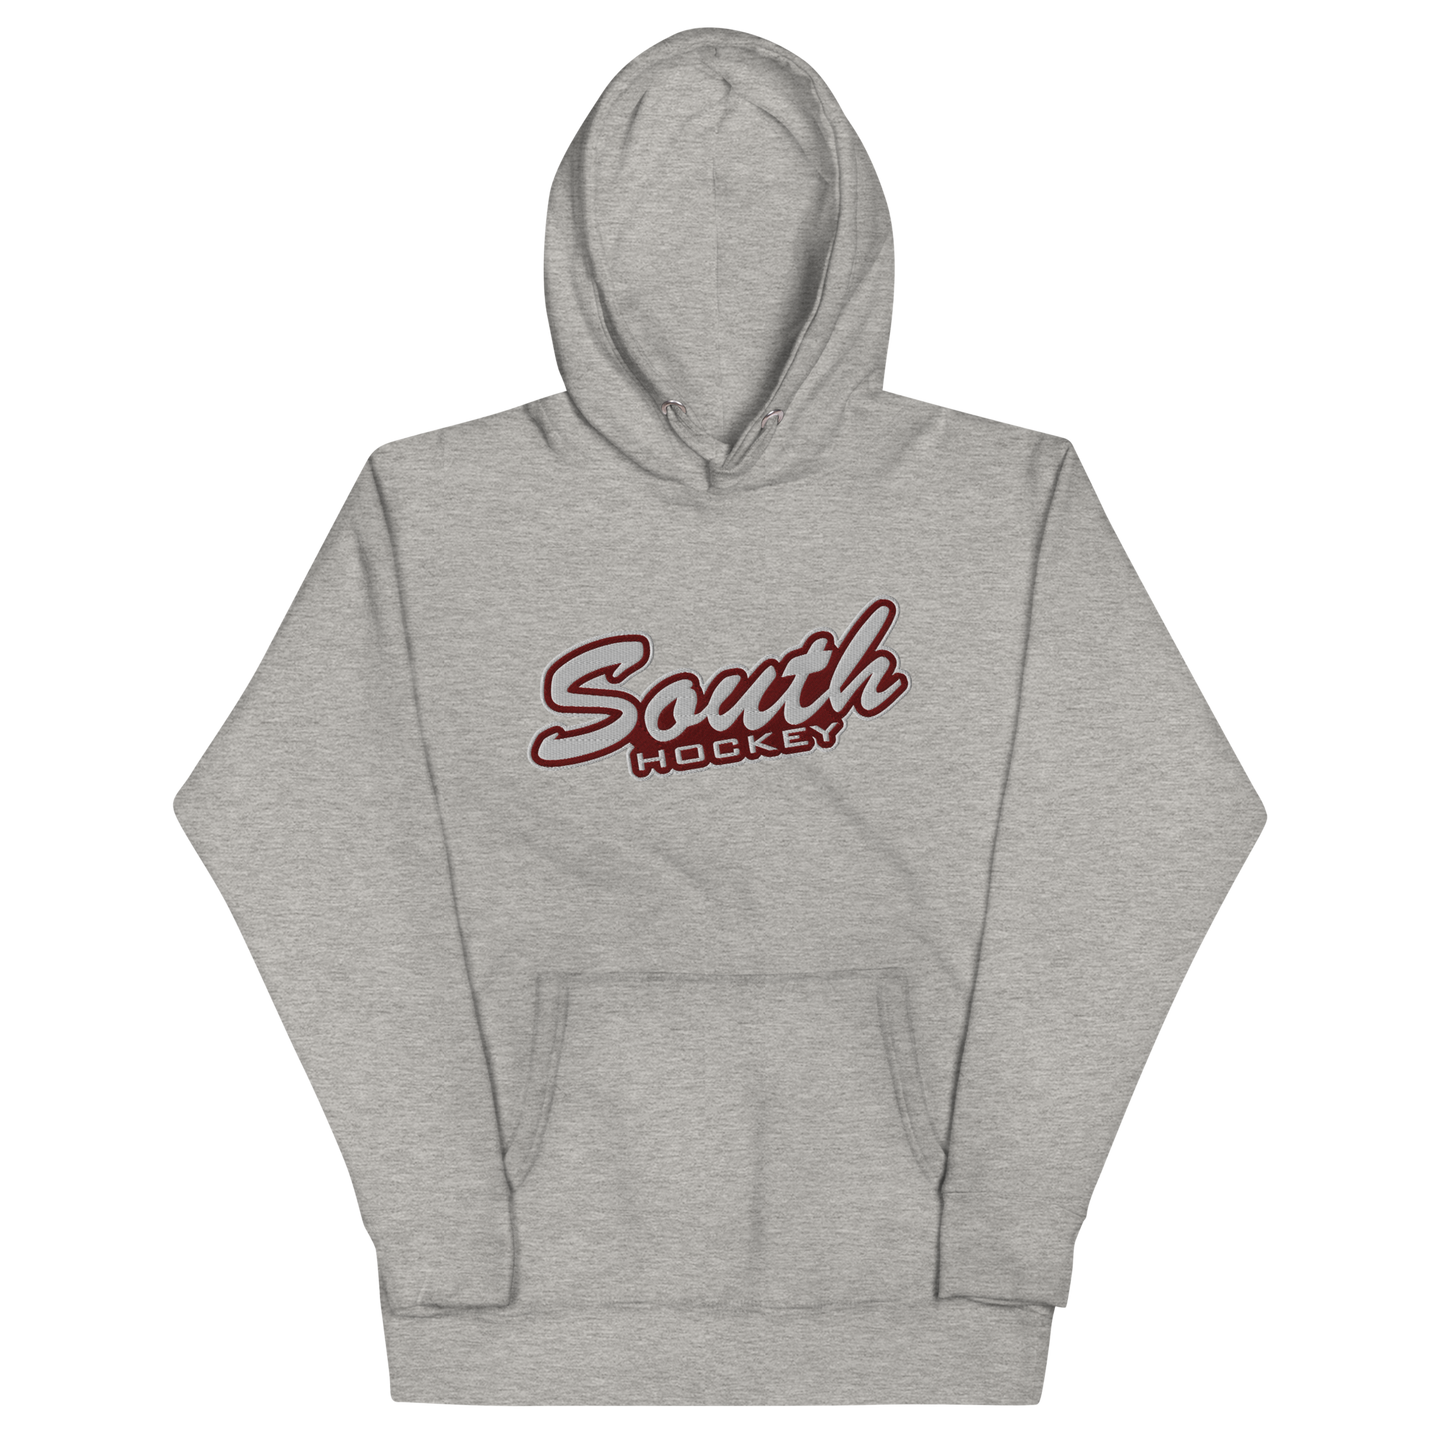 South Hockey Hoodie - Embroidered